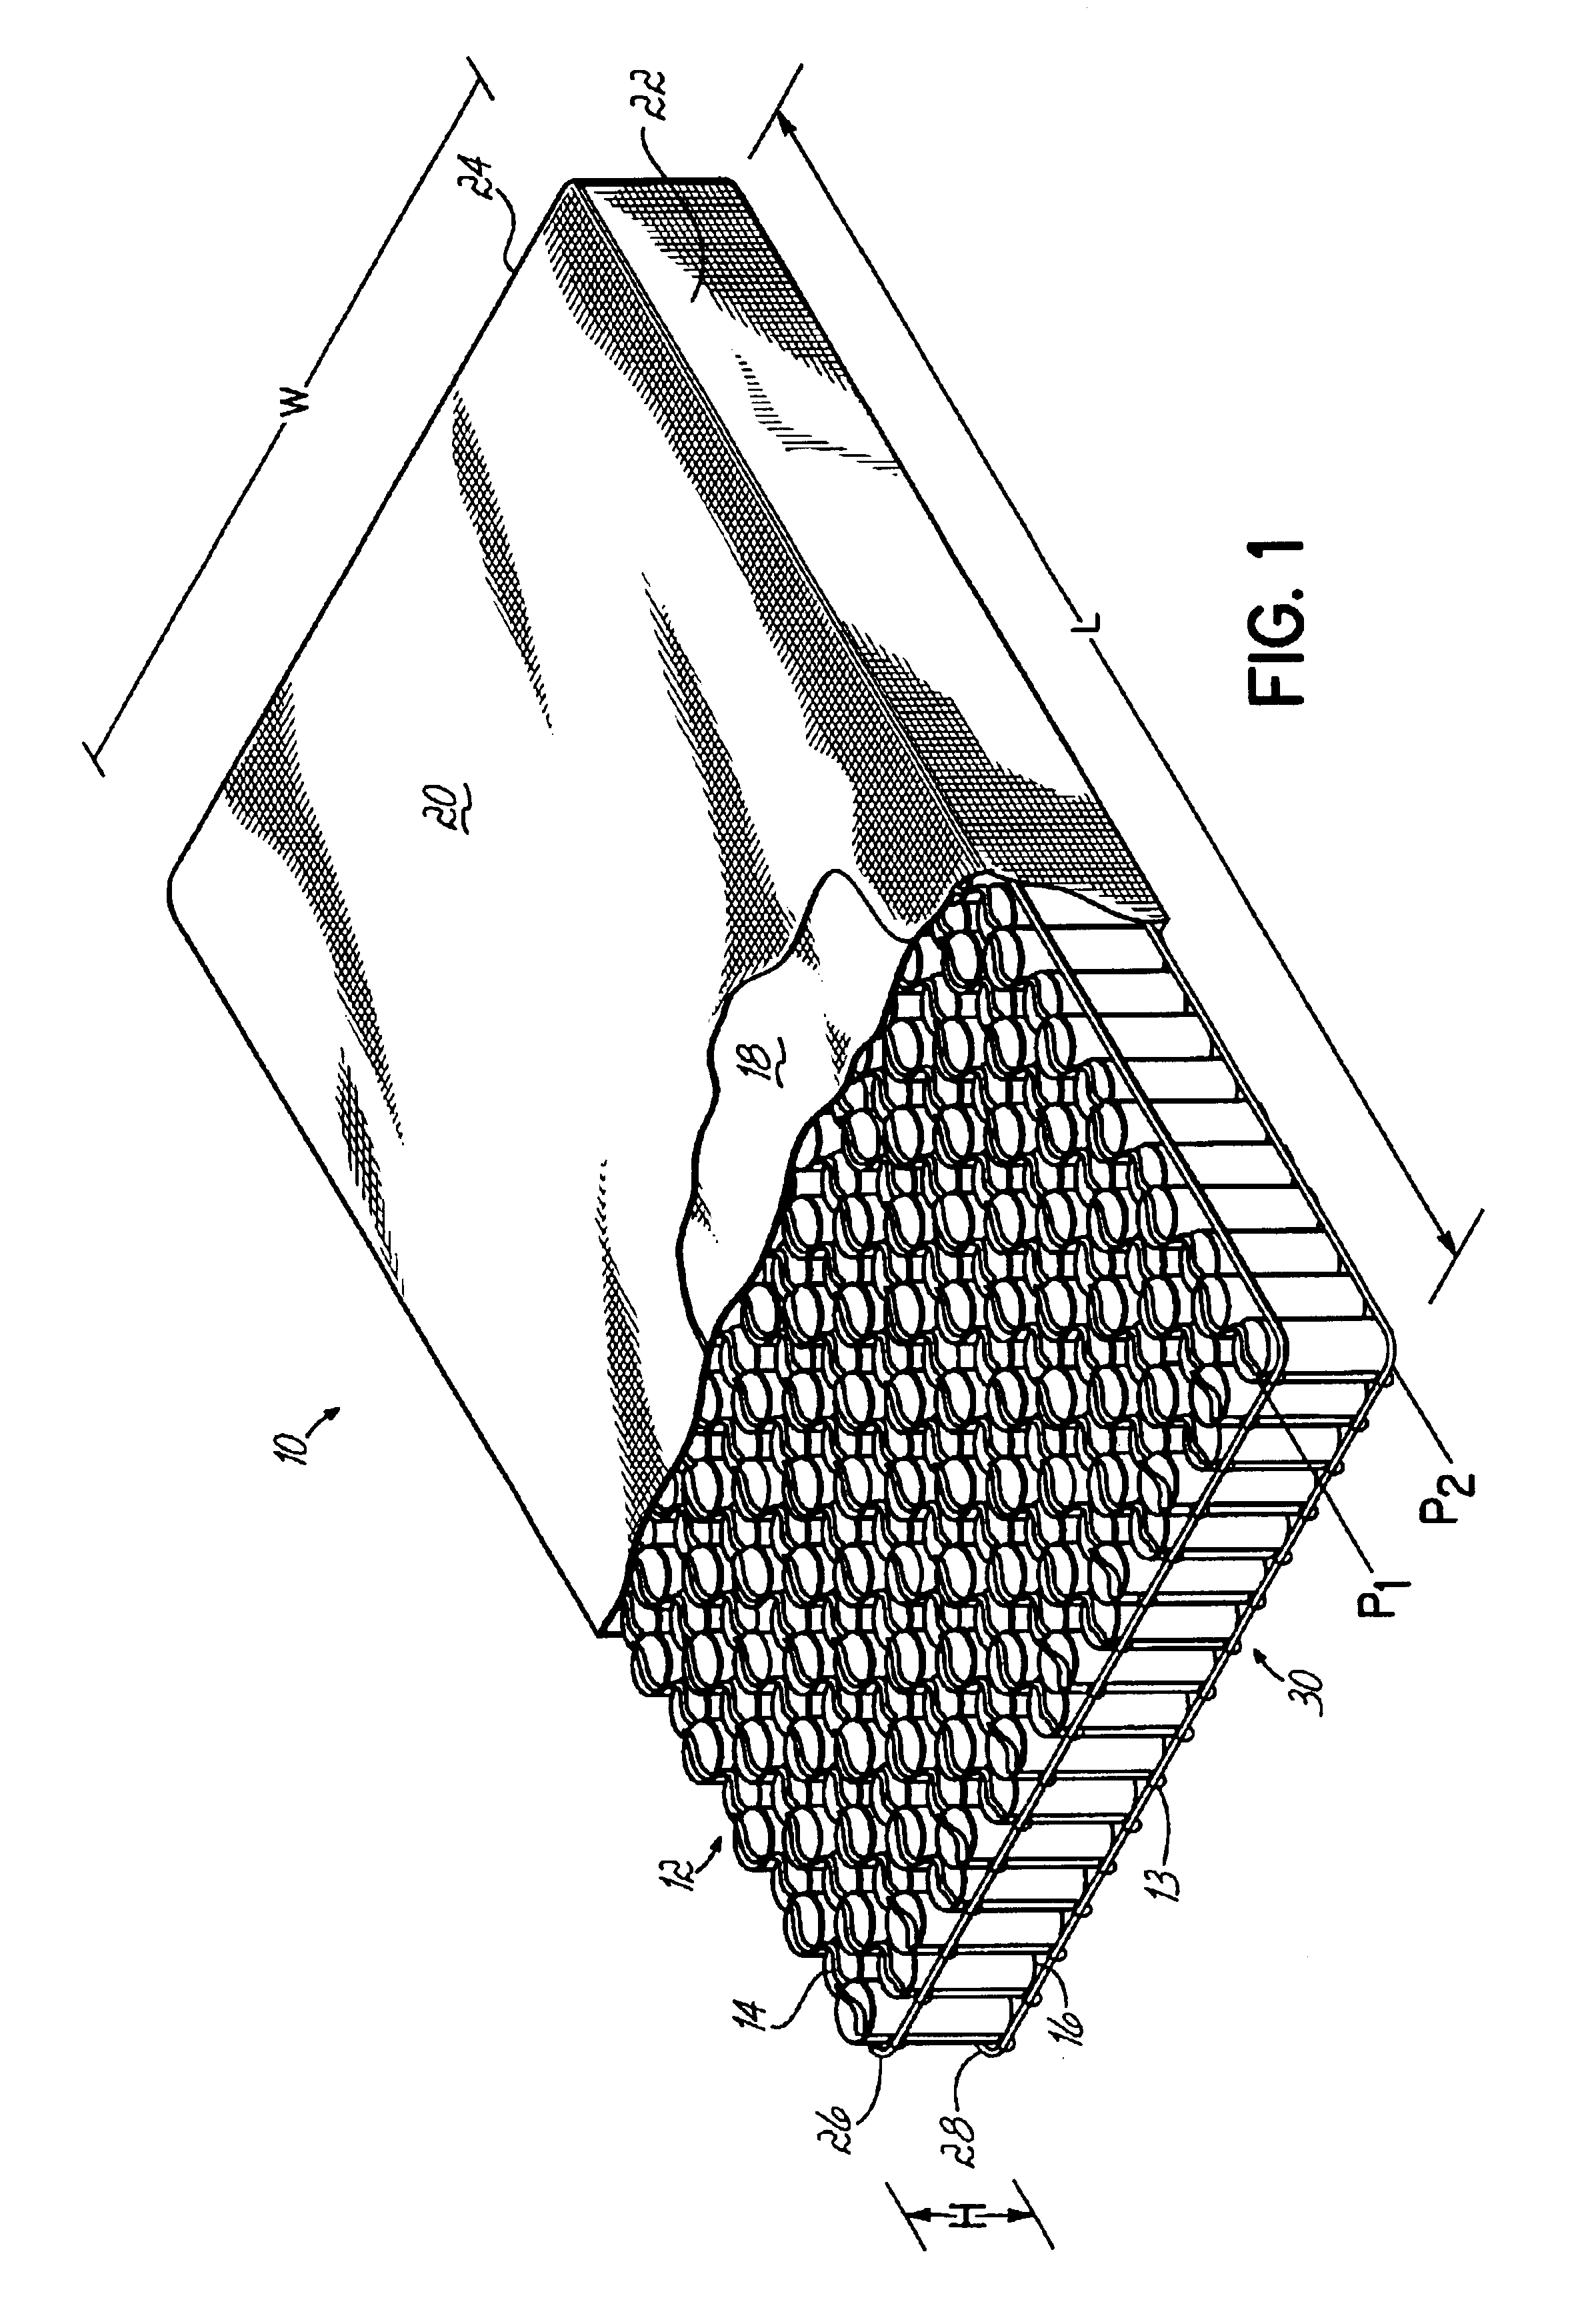 Pocketed bedding or seating product having pockets of differing heights